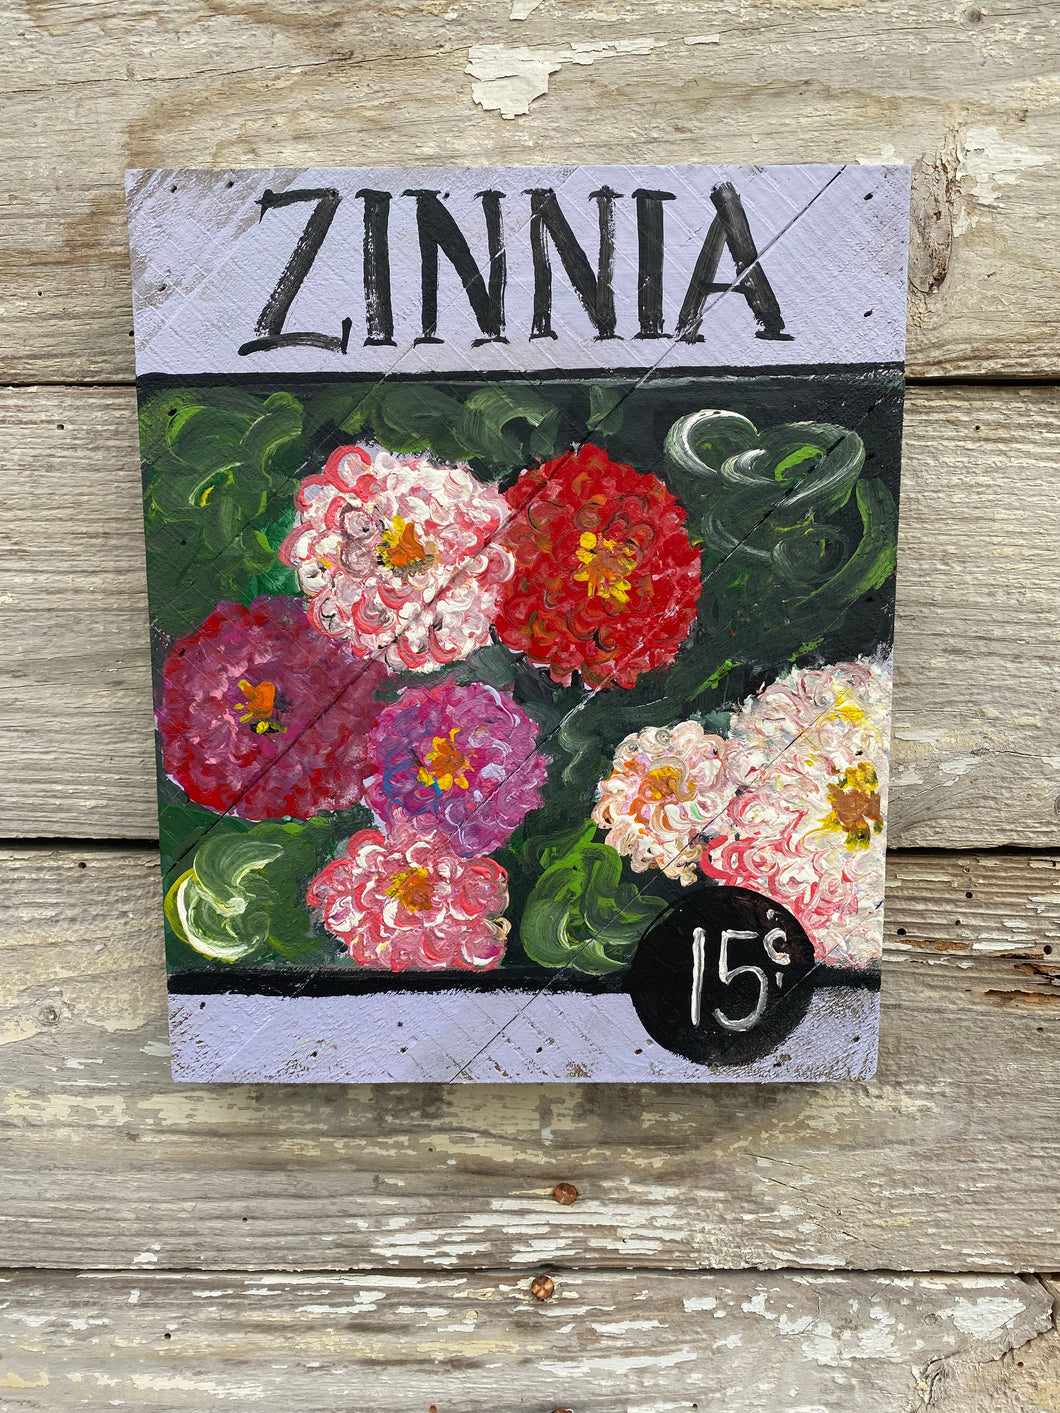 Seed Packet Zinnias- Hand-painted Wooden Square Pallet Wood Wall Decor